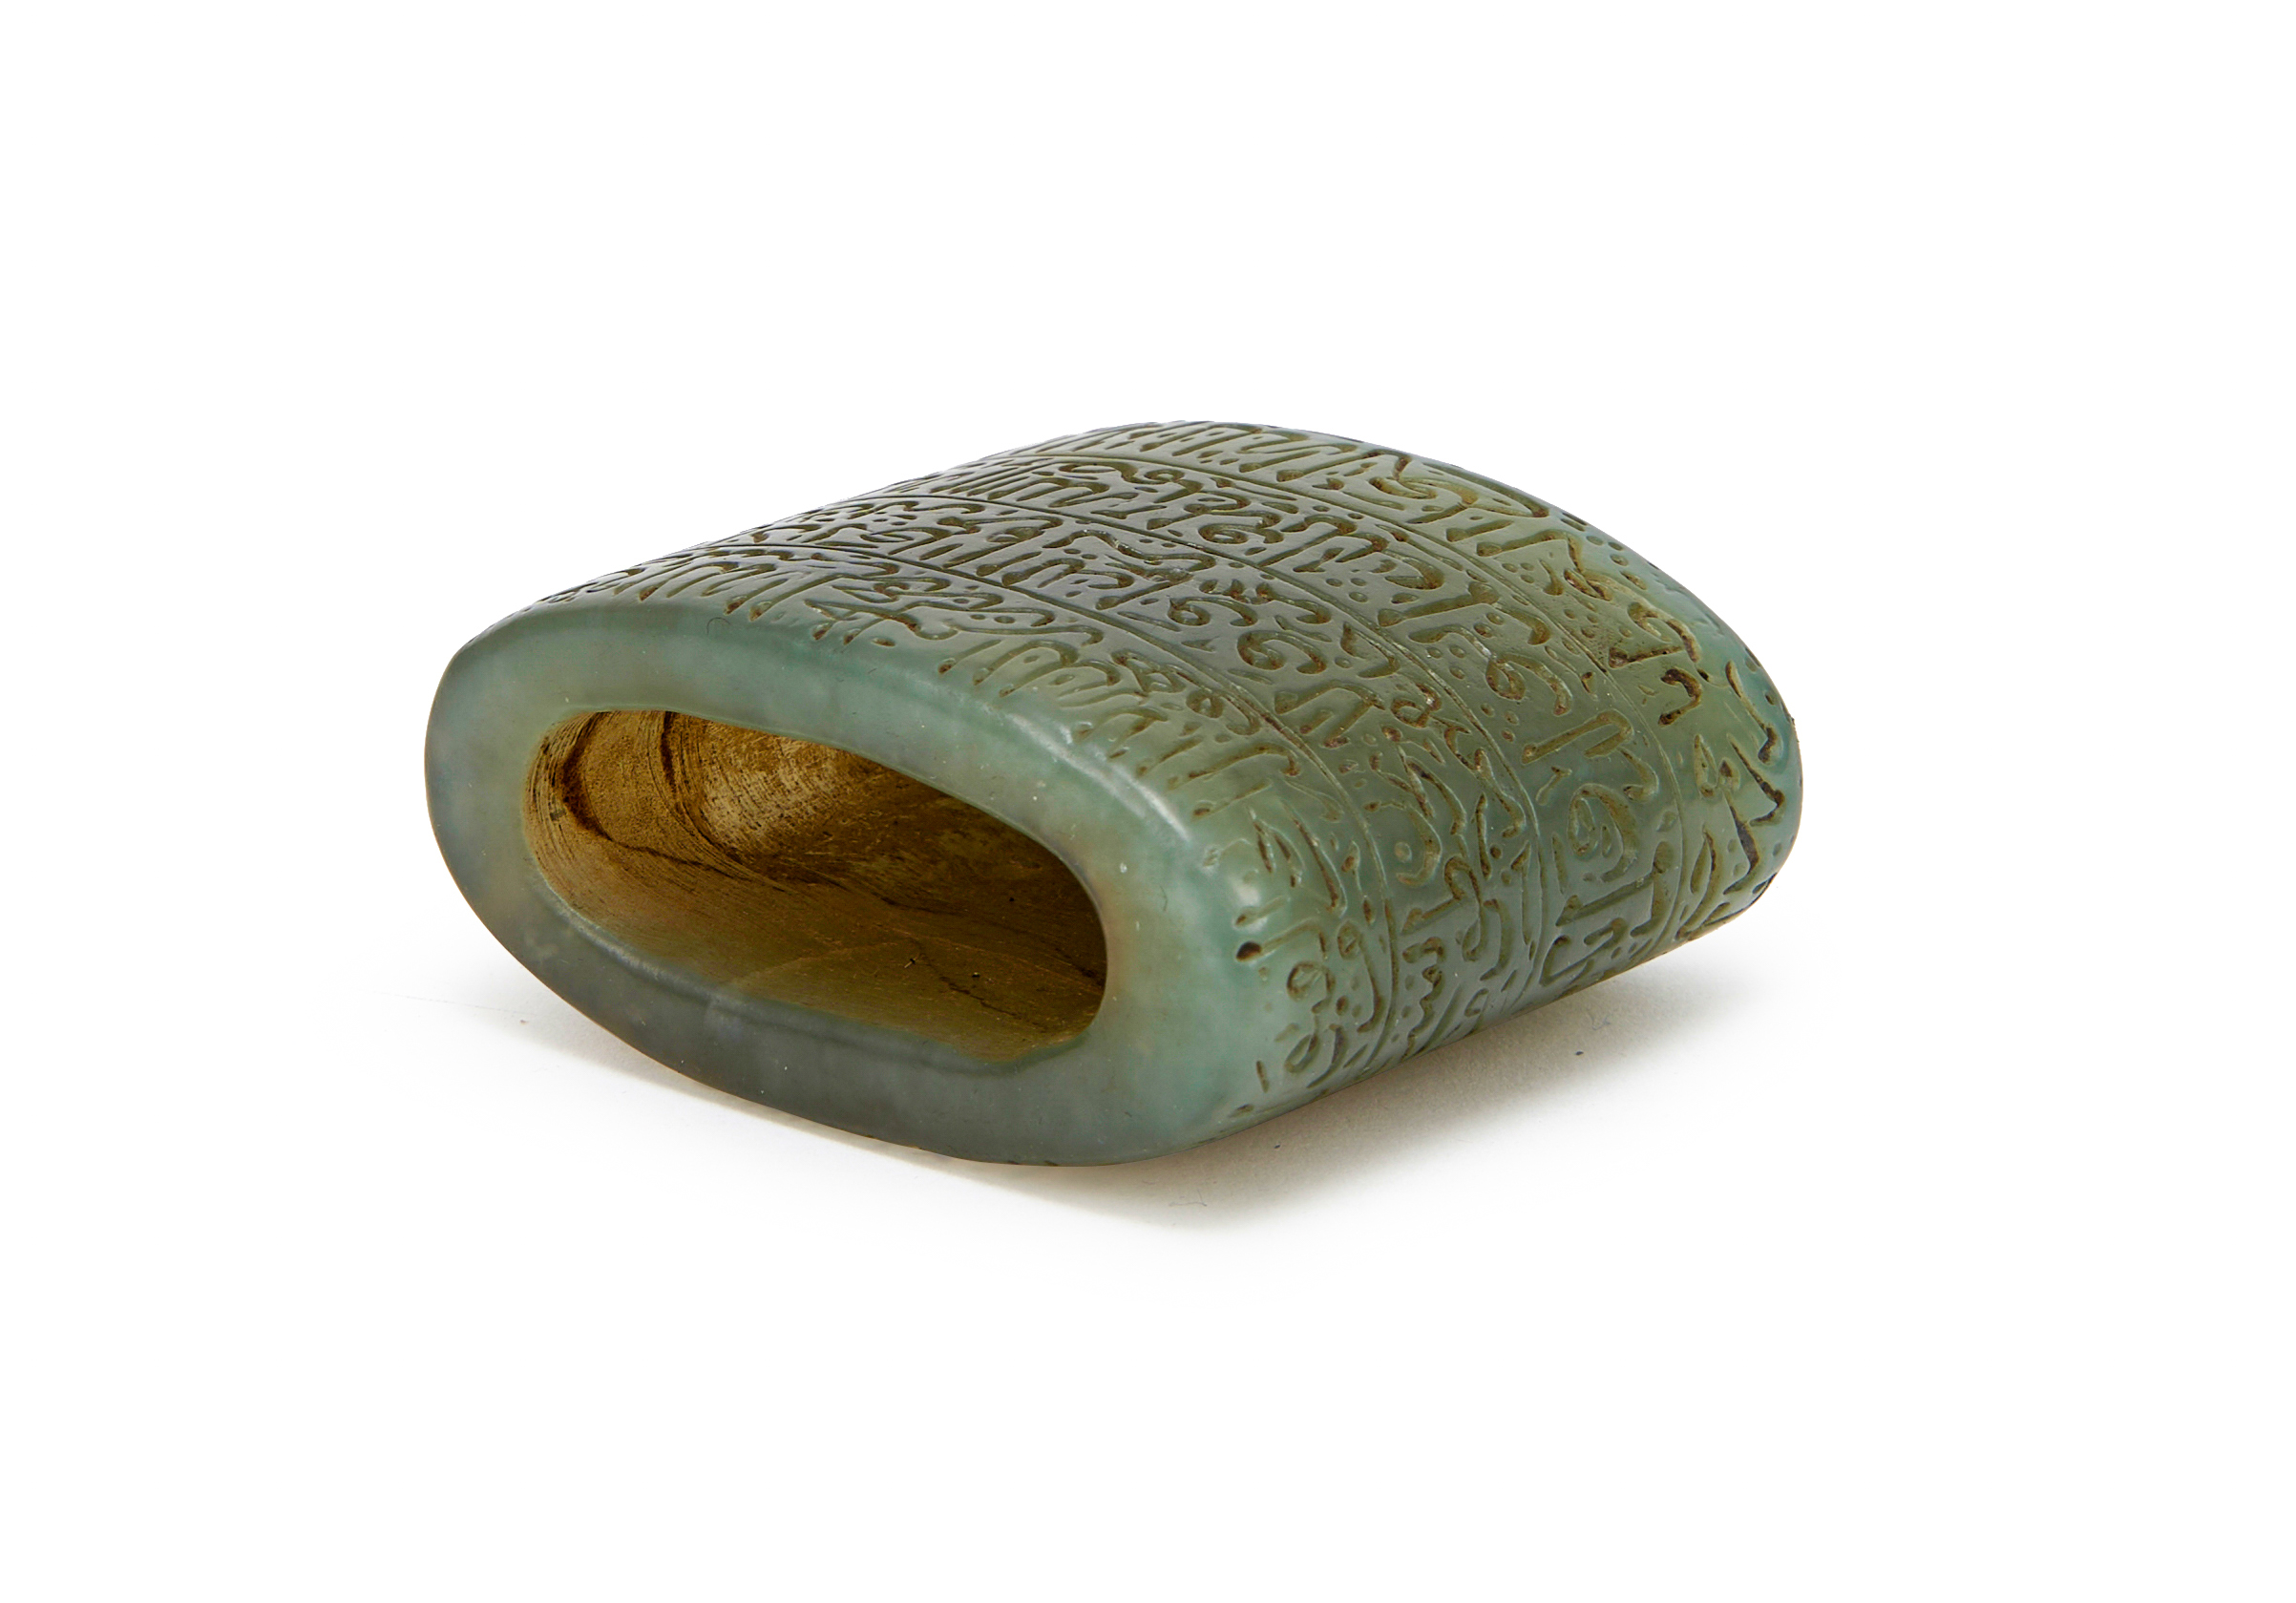 A RARE CALLIGRAPHIC INSCRIBED JADE INKWELL, 18TH CENTURY, MUGHAL, INDIA - Image 7 of 7